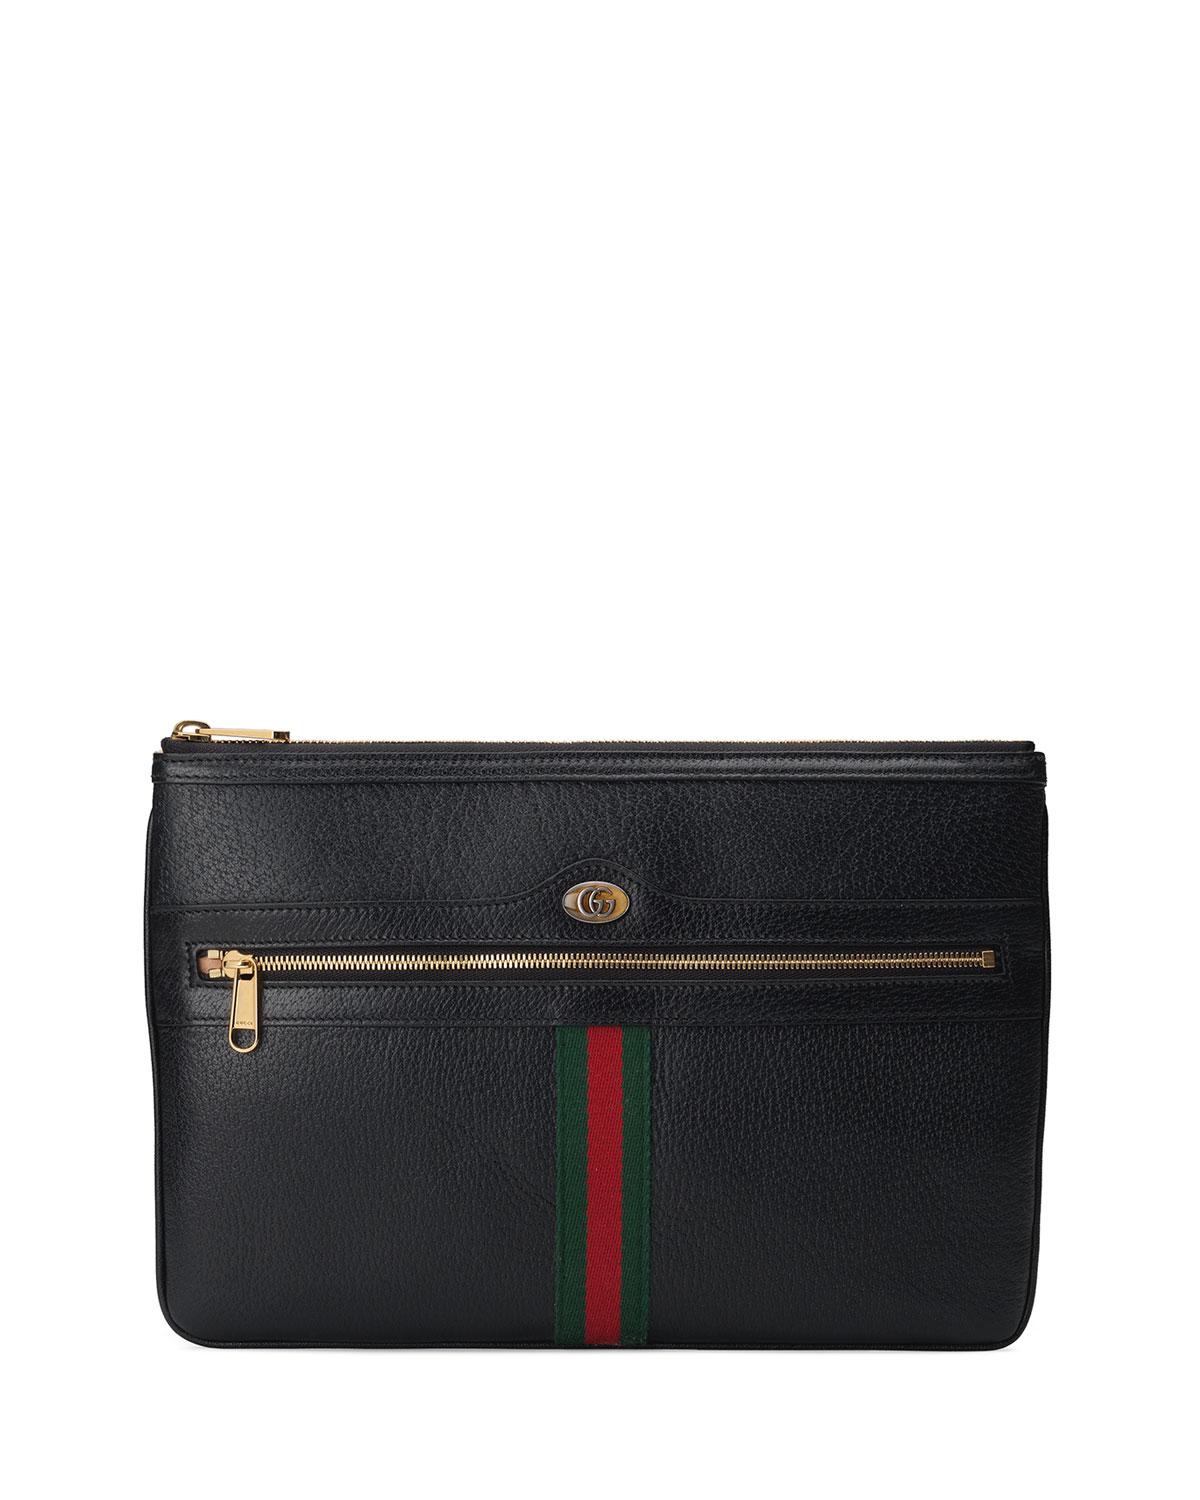 Gucci Ophidia Leather Pouch Wallet in Black - Lyst